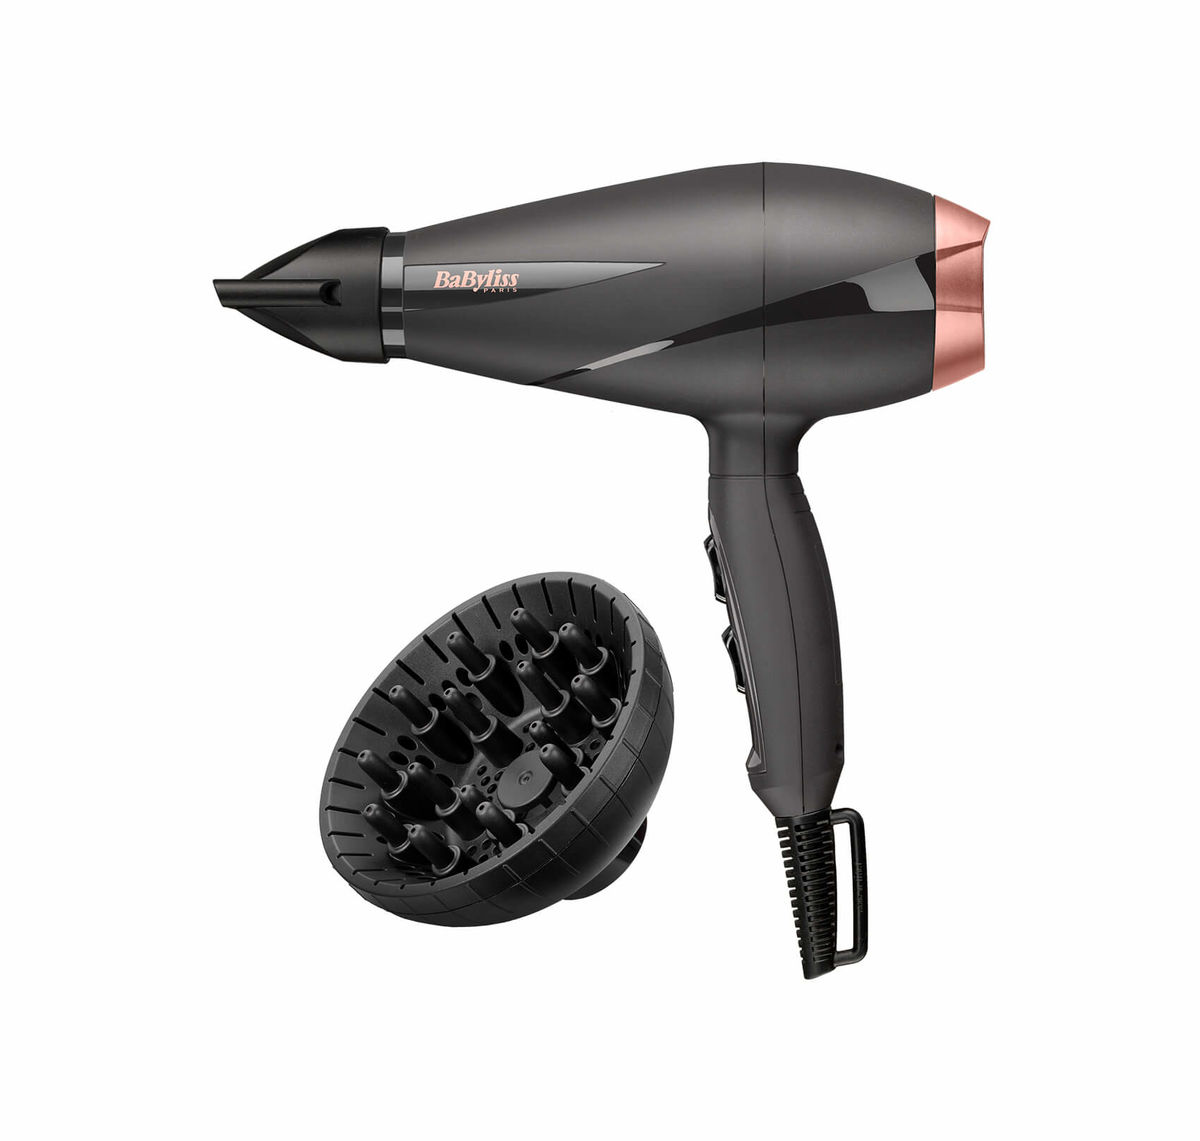 Image of Babyliss 6709DCHE Smooth Pro 2100W Haartrockner bei nettoshop.ch